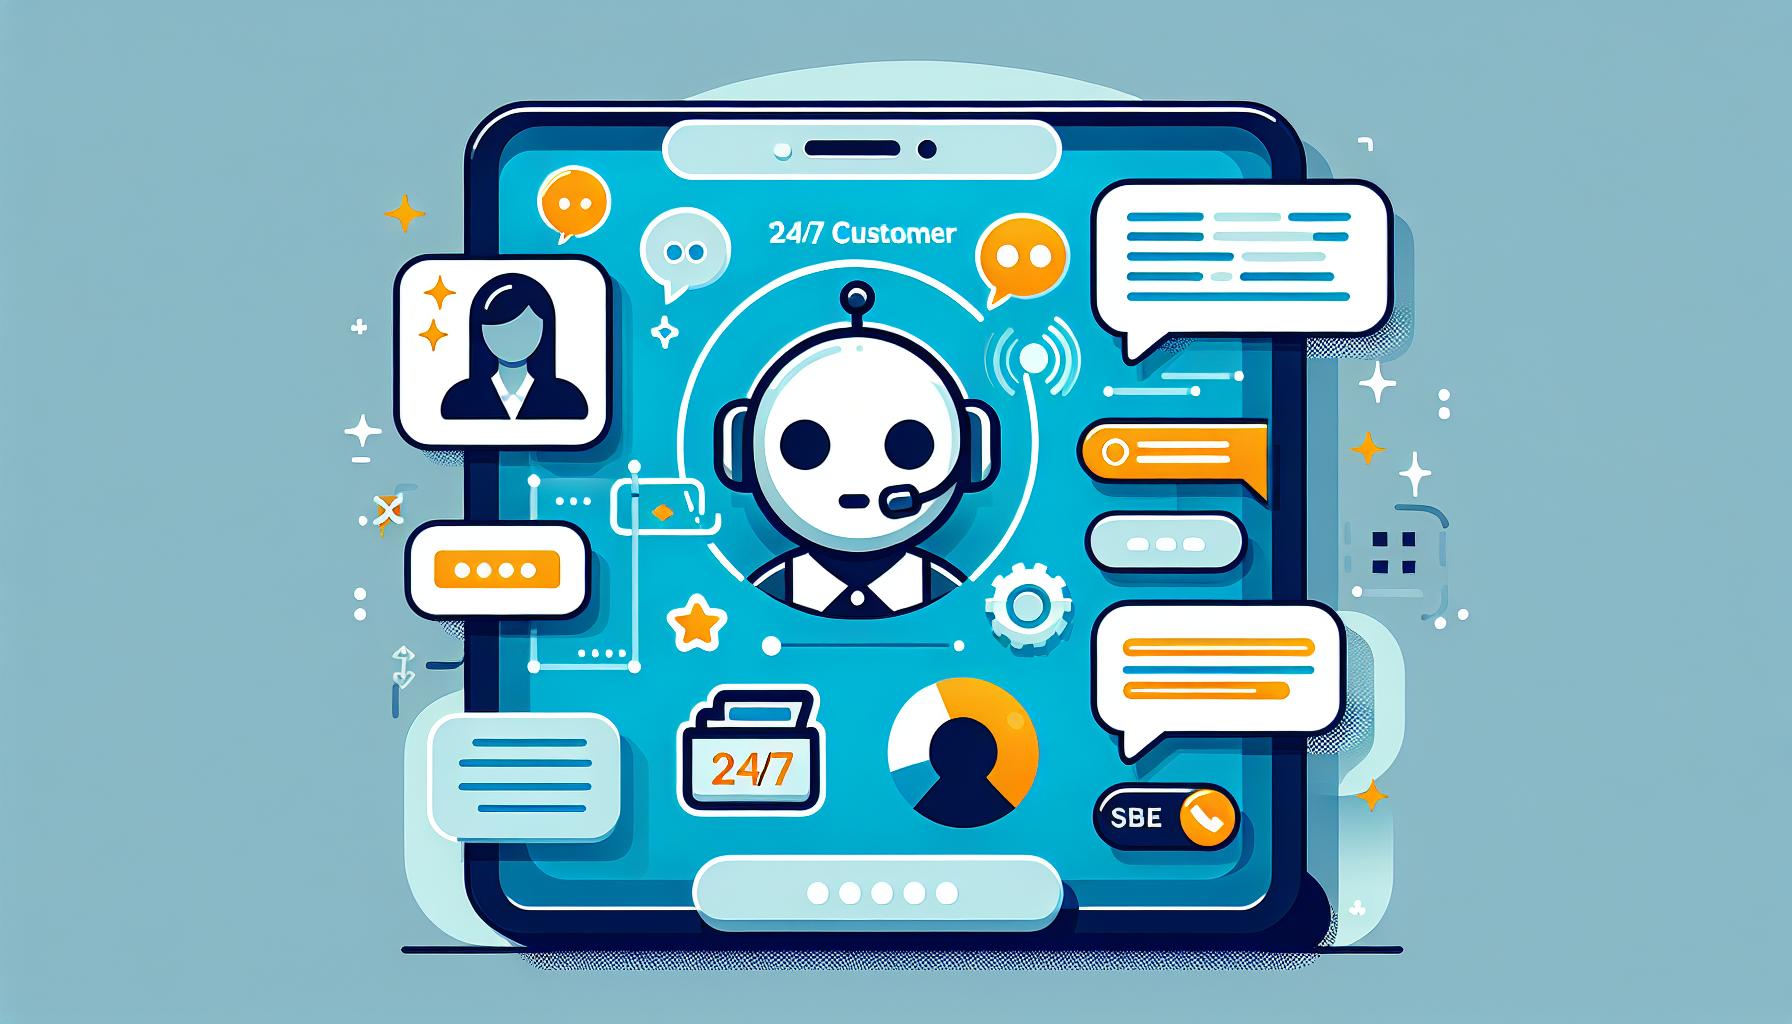 Boost Your Business: Top Benefits of Chatbots in Customer Service Revealed